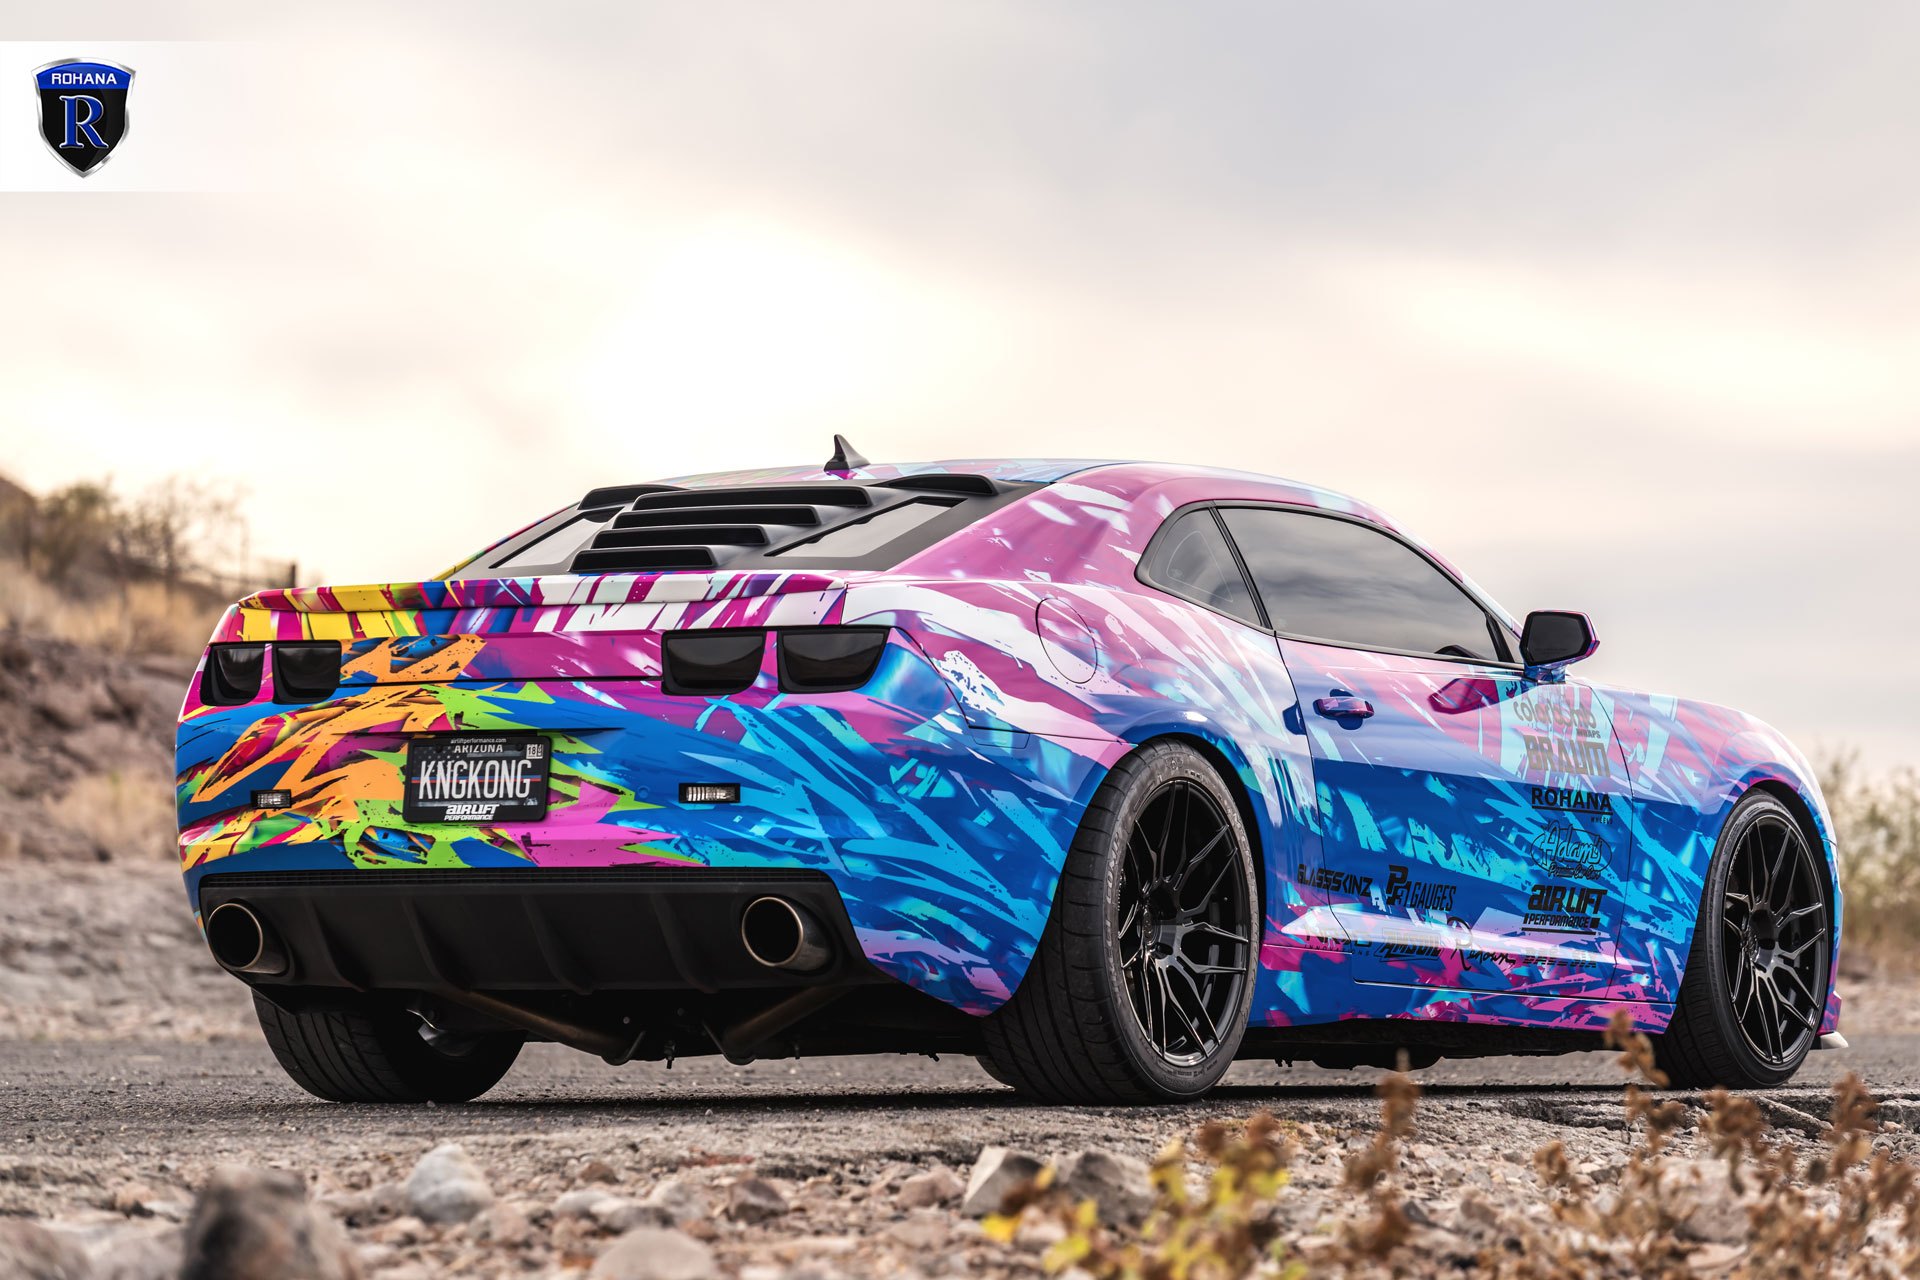 Aftermarket Rear Diffuser on Colorful Chevy Camaro - Photo by Rohana Wheels